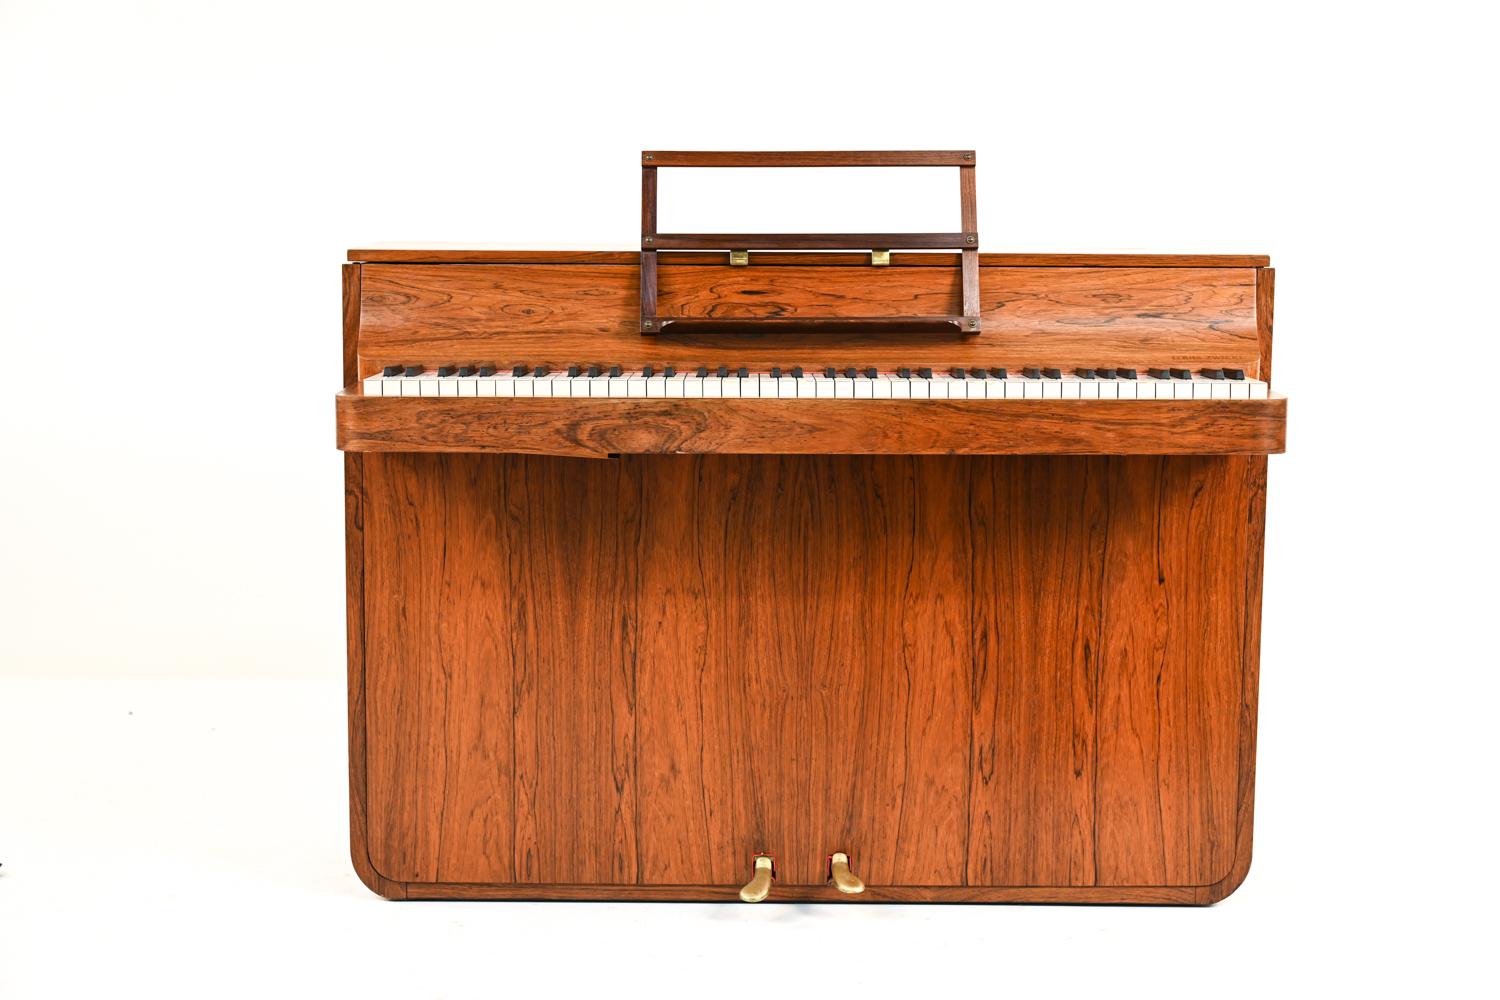 A rare mid-century Danish piano, made of beautiful rosewood. It is called a pianette because of its 82 keys rather than the standard 88 keys of a full-size piano. This piano is made by the famous piano maker Louis Zwicki. Every piano by Louis Zwicki